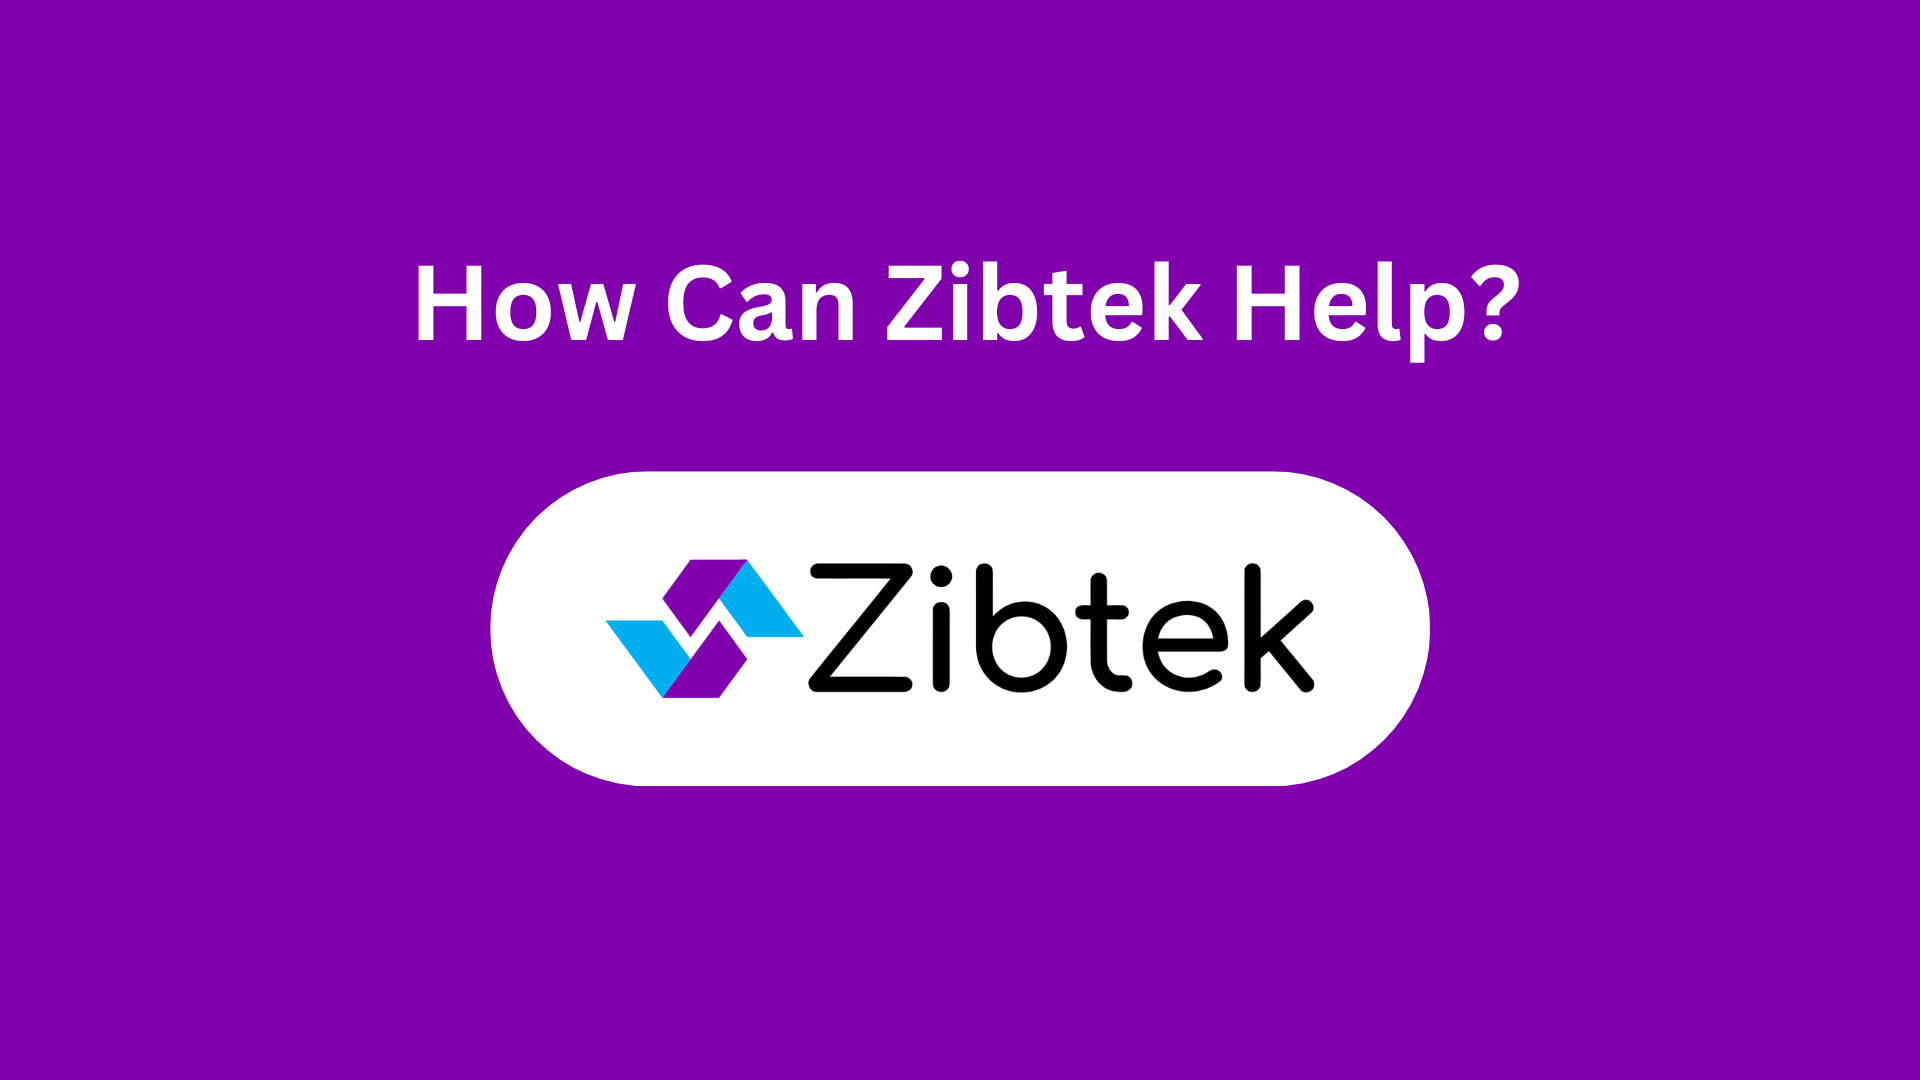 Zibtek logo with text on how they can help with custom mobile app development